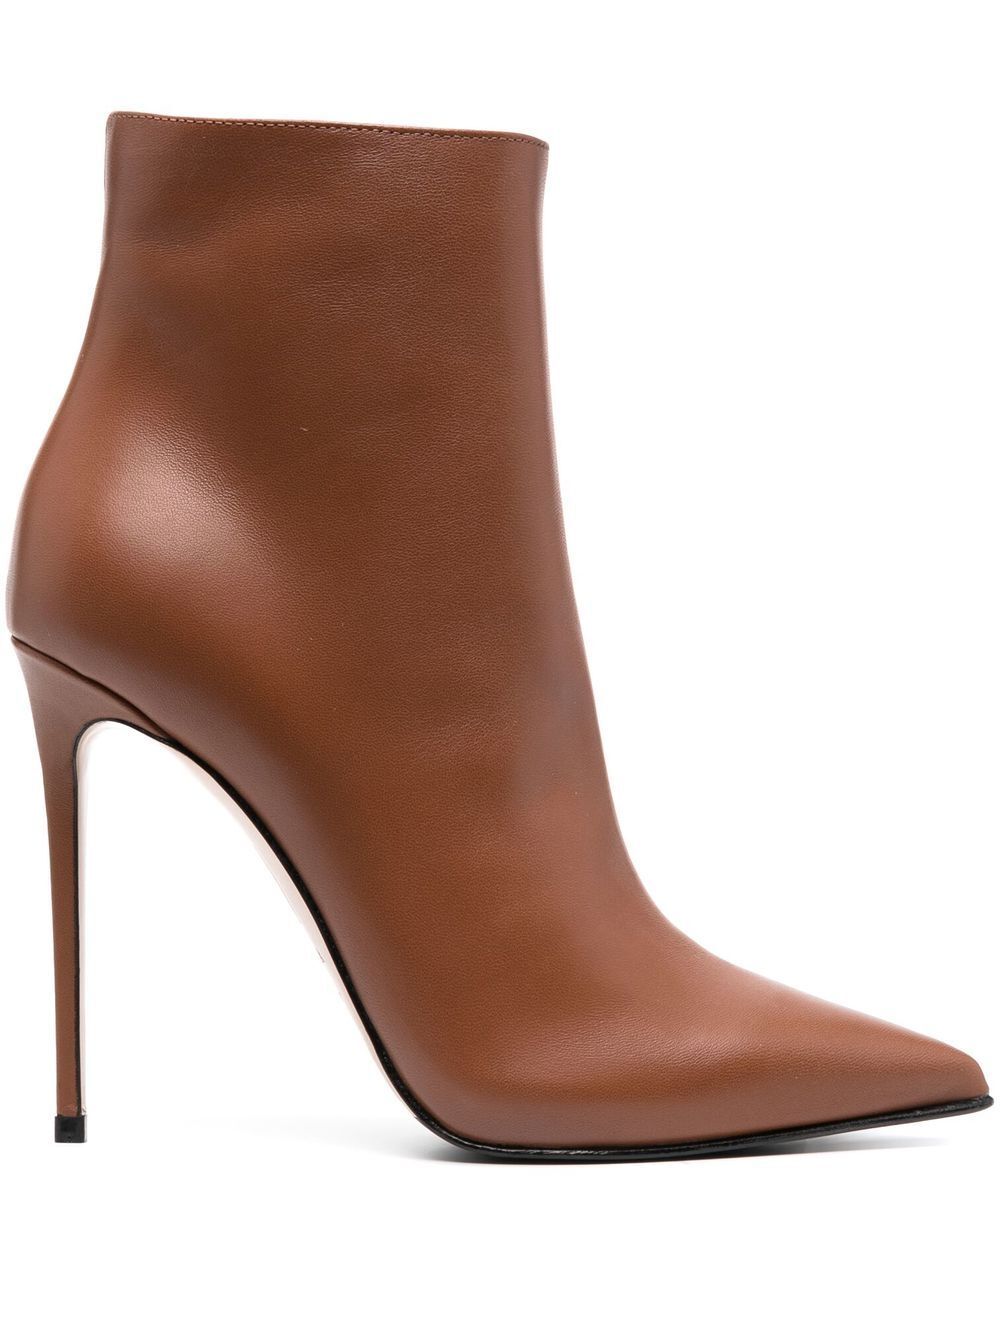 Le Silla 125mm Eva leather ankle boots - Brown